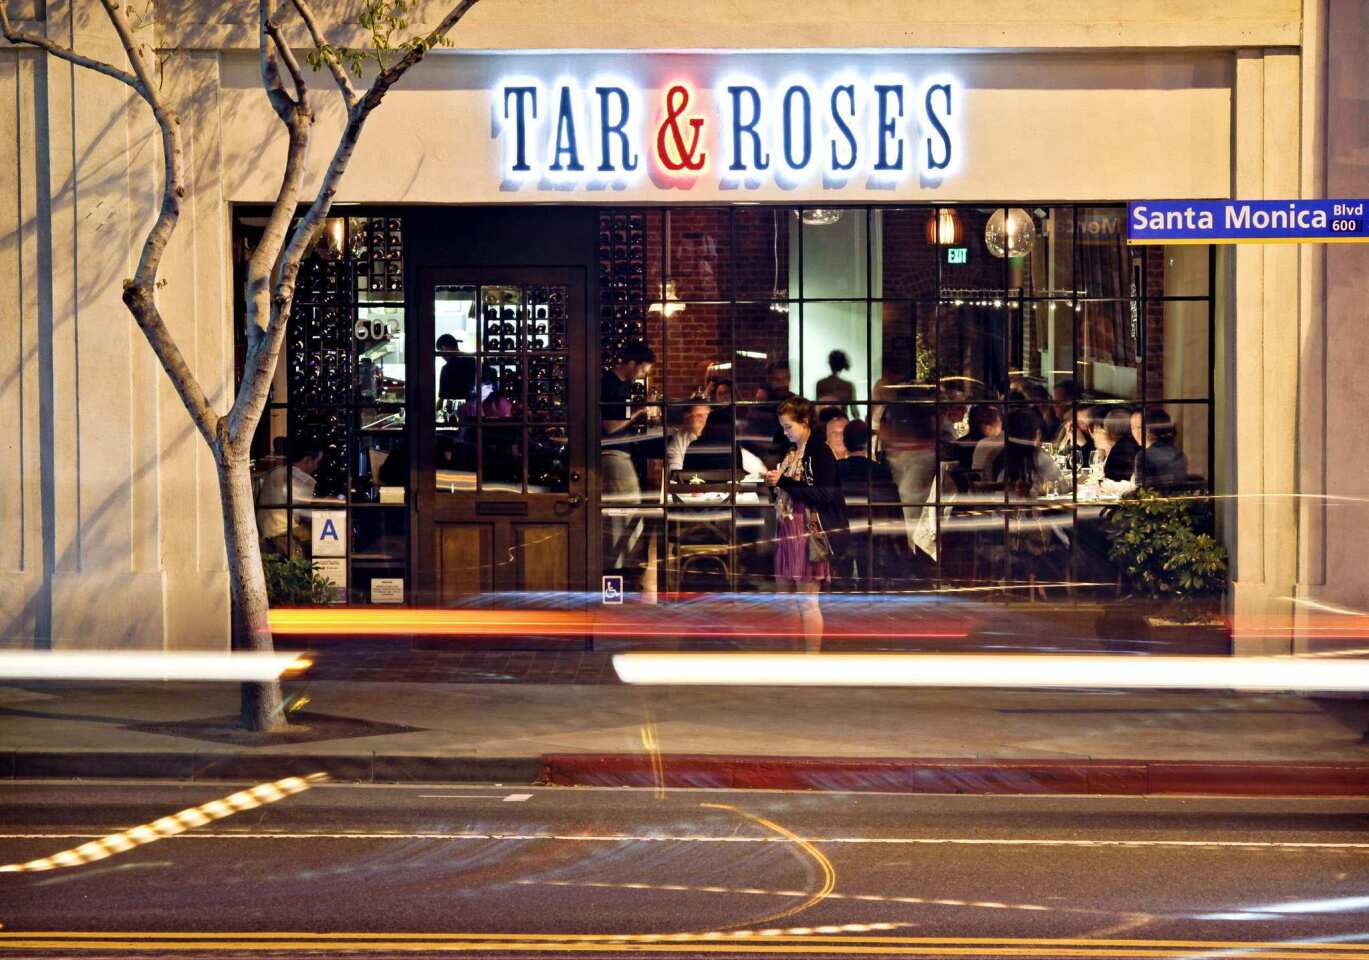 Tar & Roses is a small-plate restaurant where much of the food is cooked in a wood-burning oven.